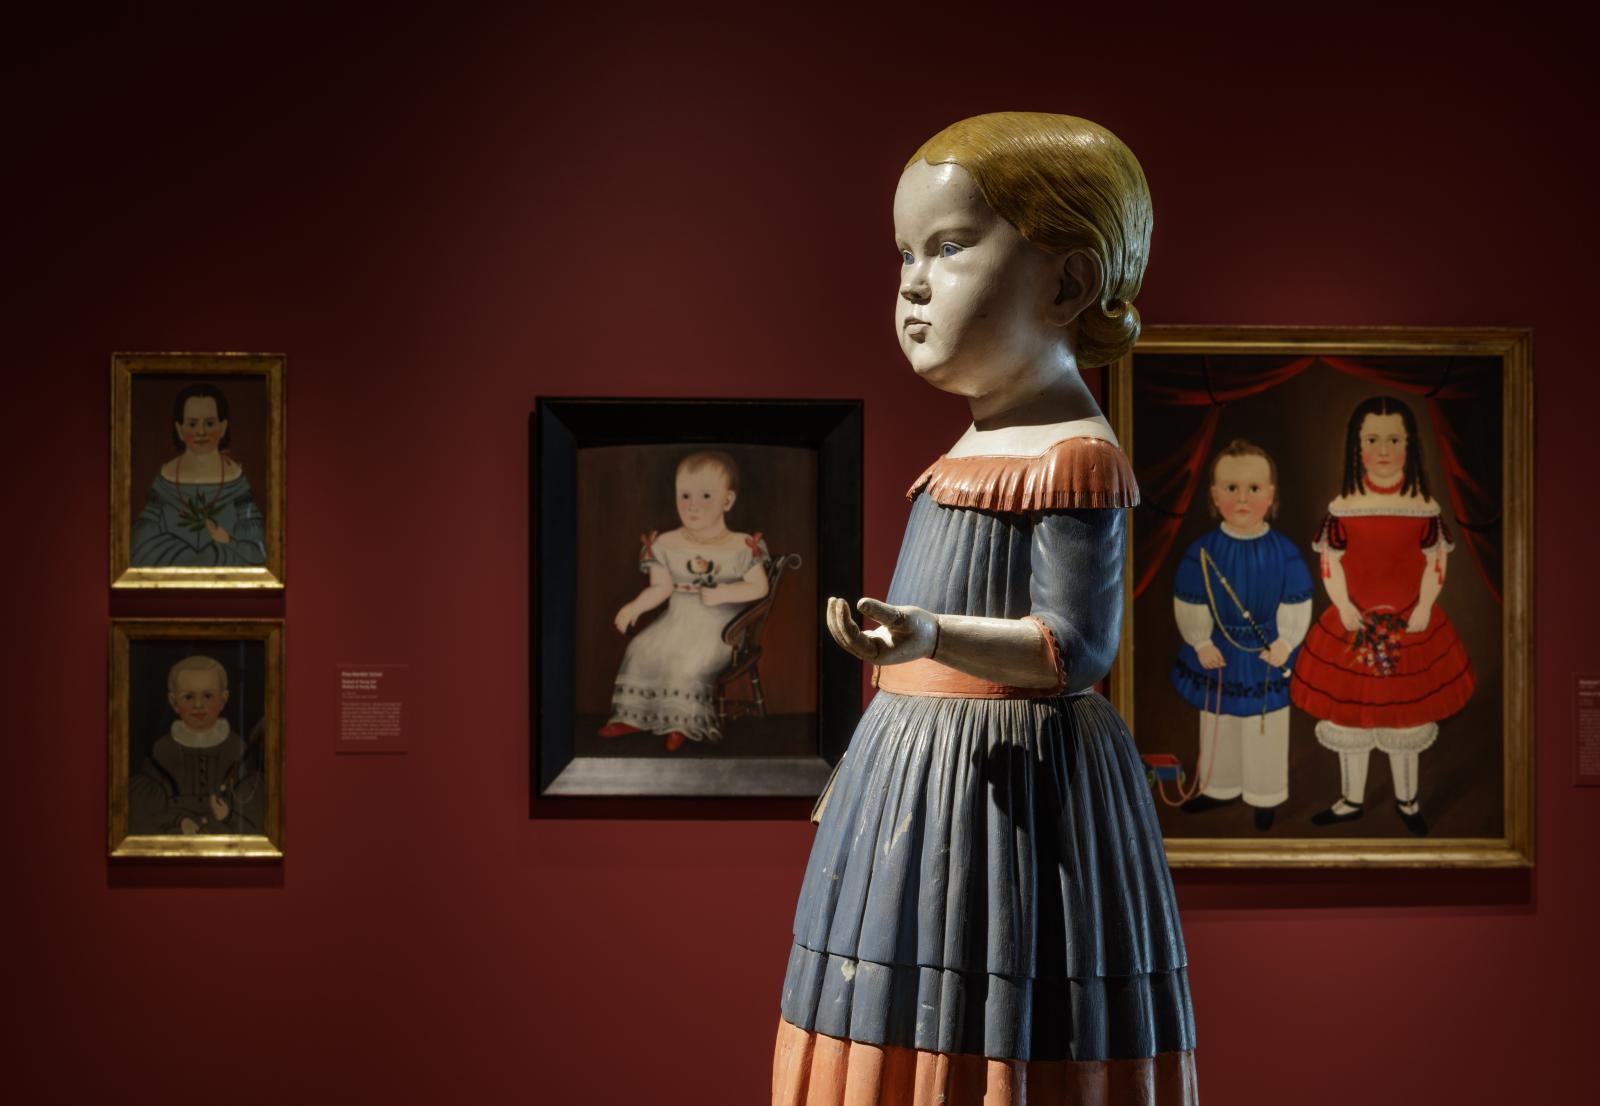 Image of portraits of children displayed on a wall with a sculpture of a young girl placed in front of them.